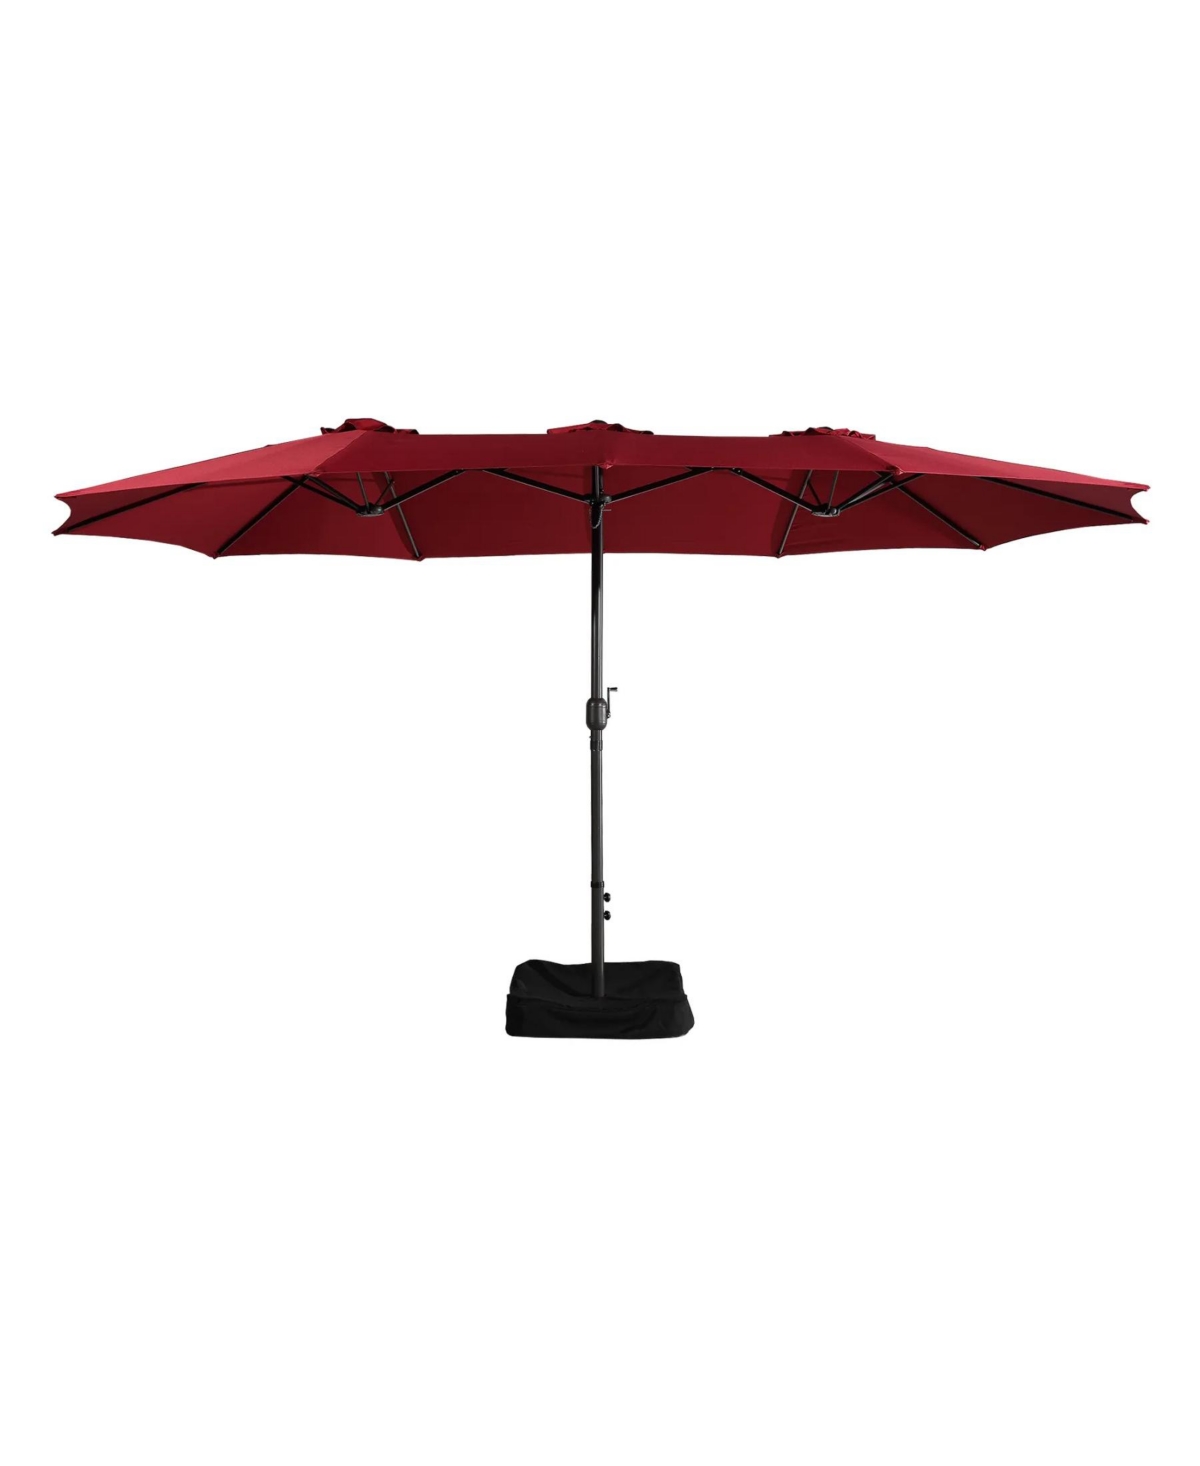 15ft Rectangular Double-Sided Outdoor Patio Market Umbrella with Base Included - Tan